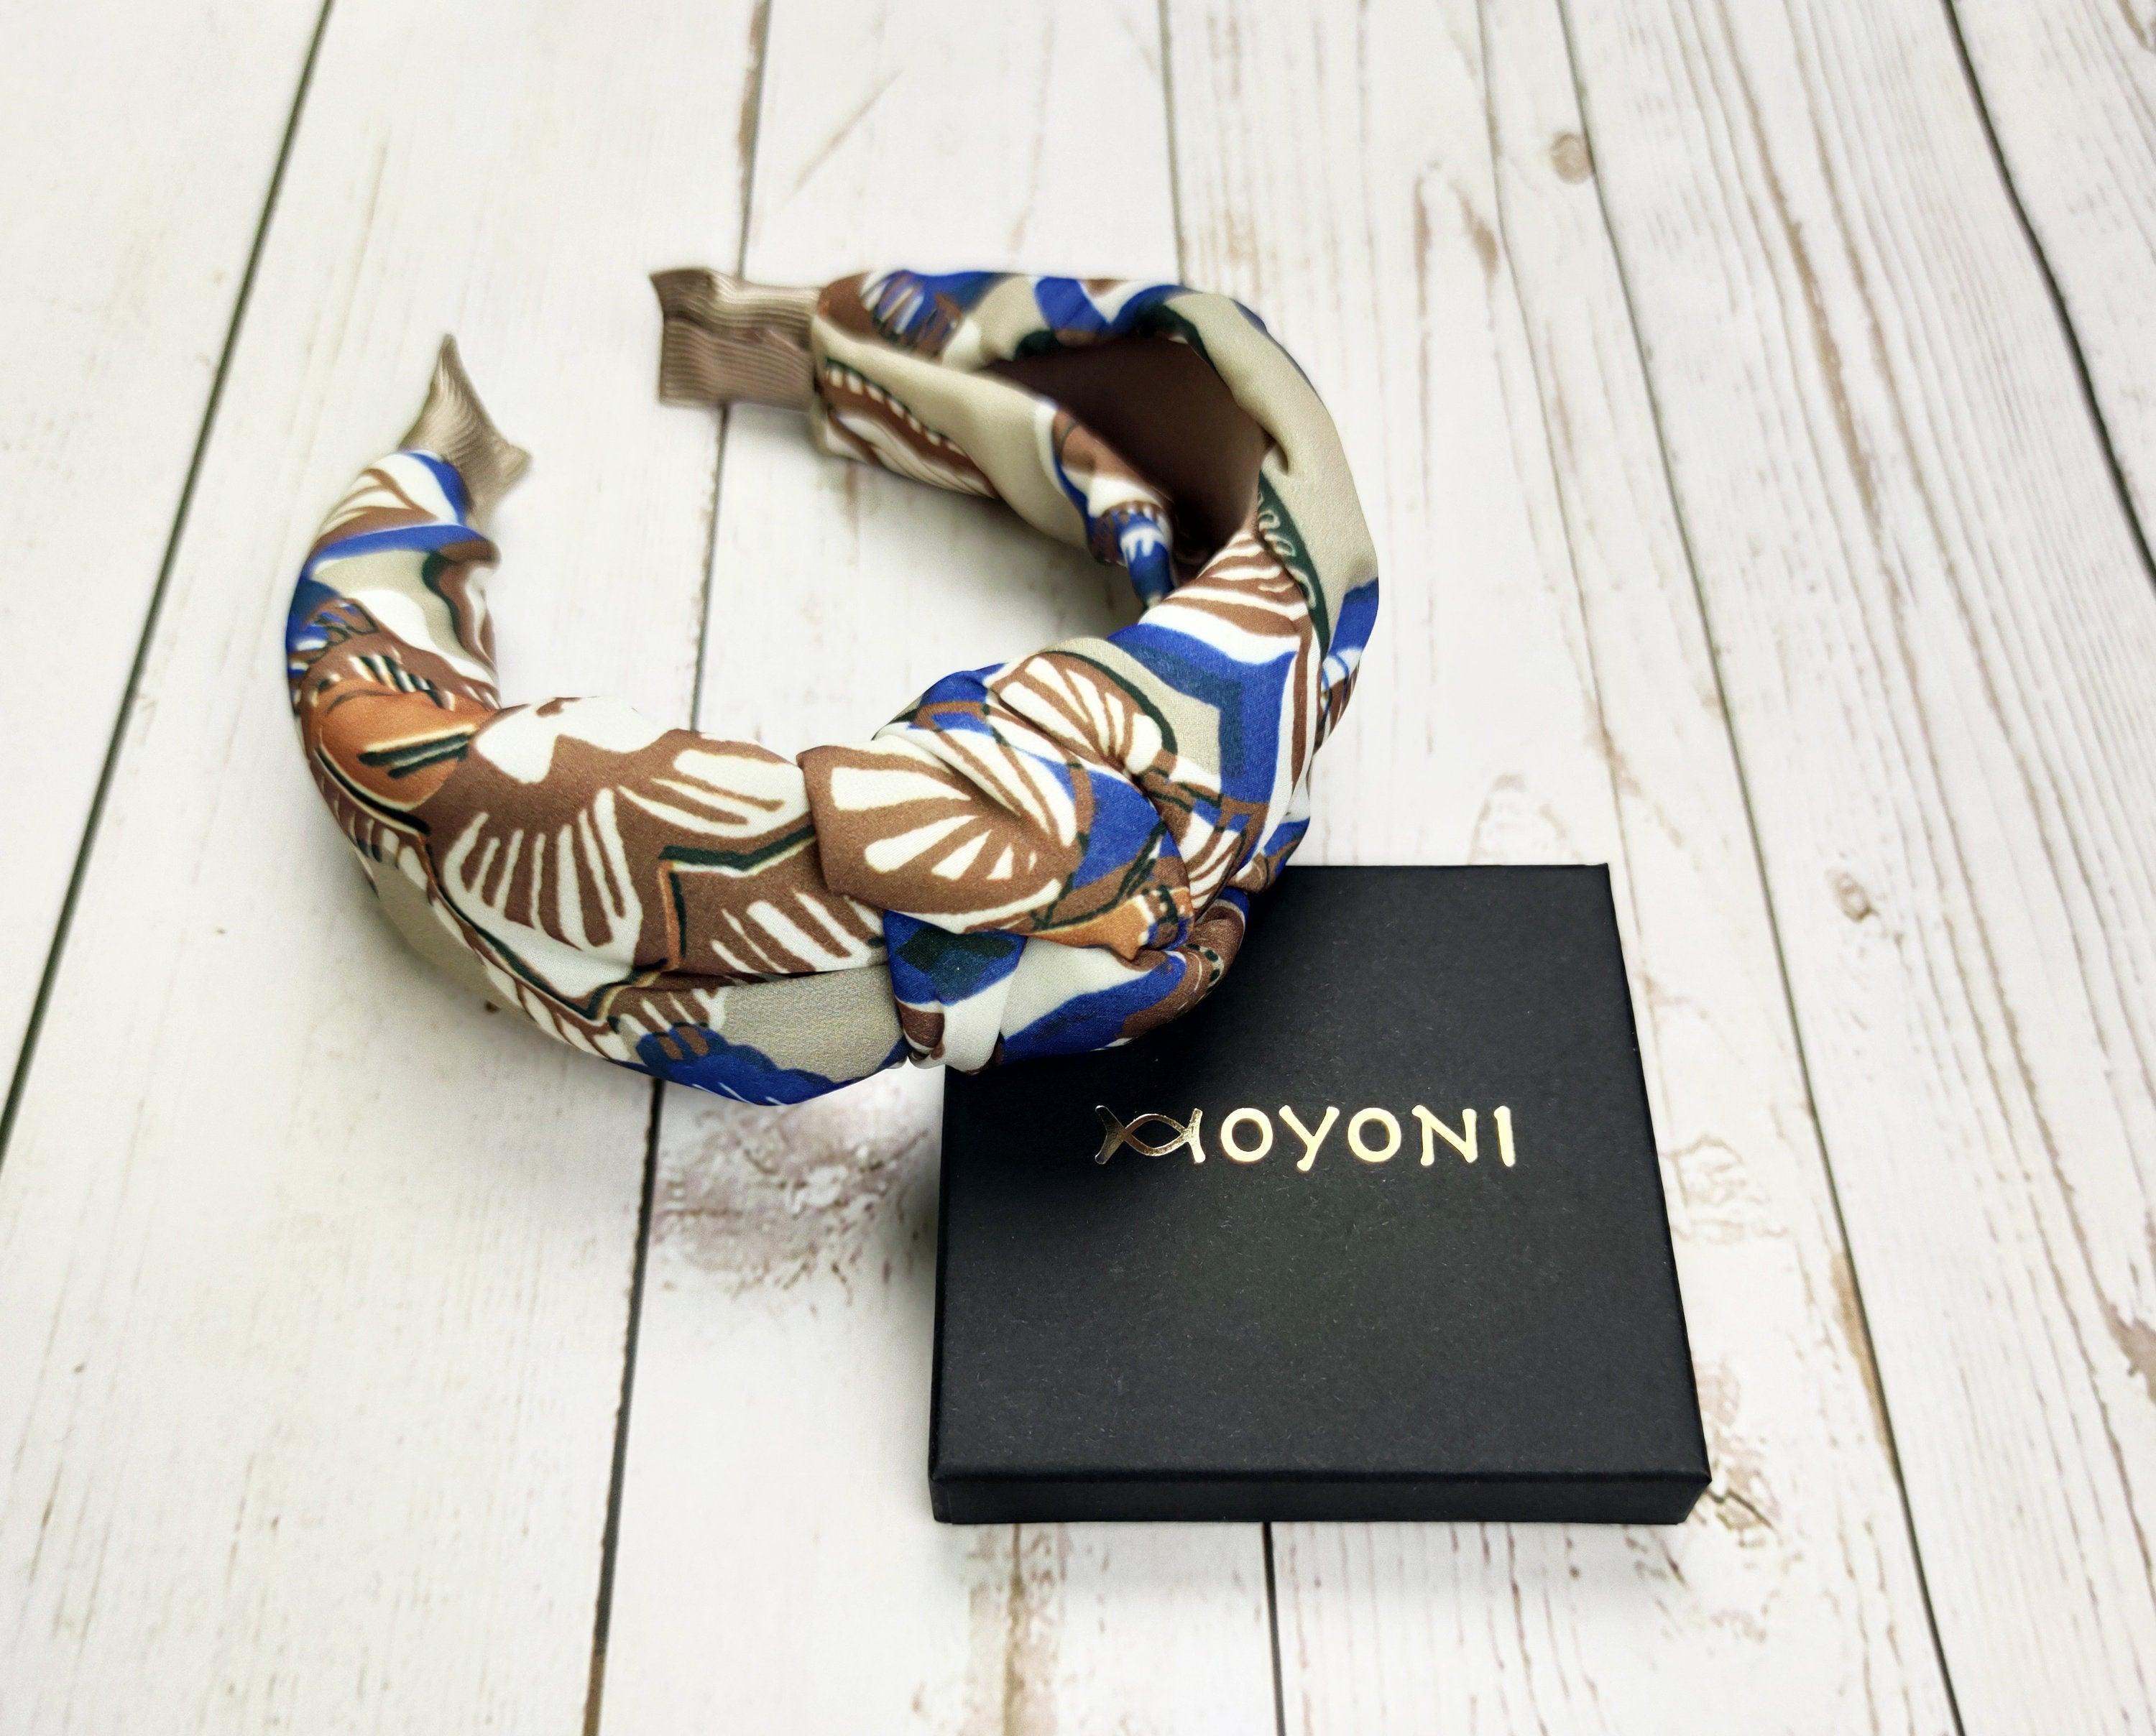 High-Quality Blue Brown Beige Leaf Pattern Knotted Headband - Stylish and Wide Women's Hairband in Viscose Crepe available at Moyoni Design